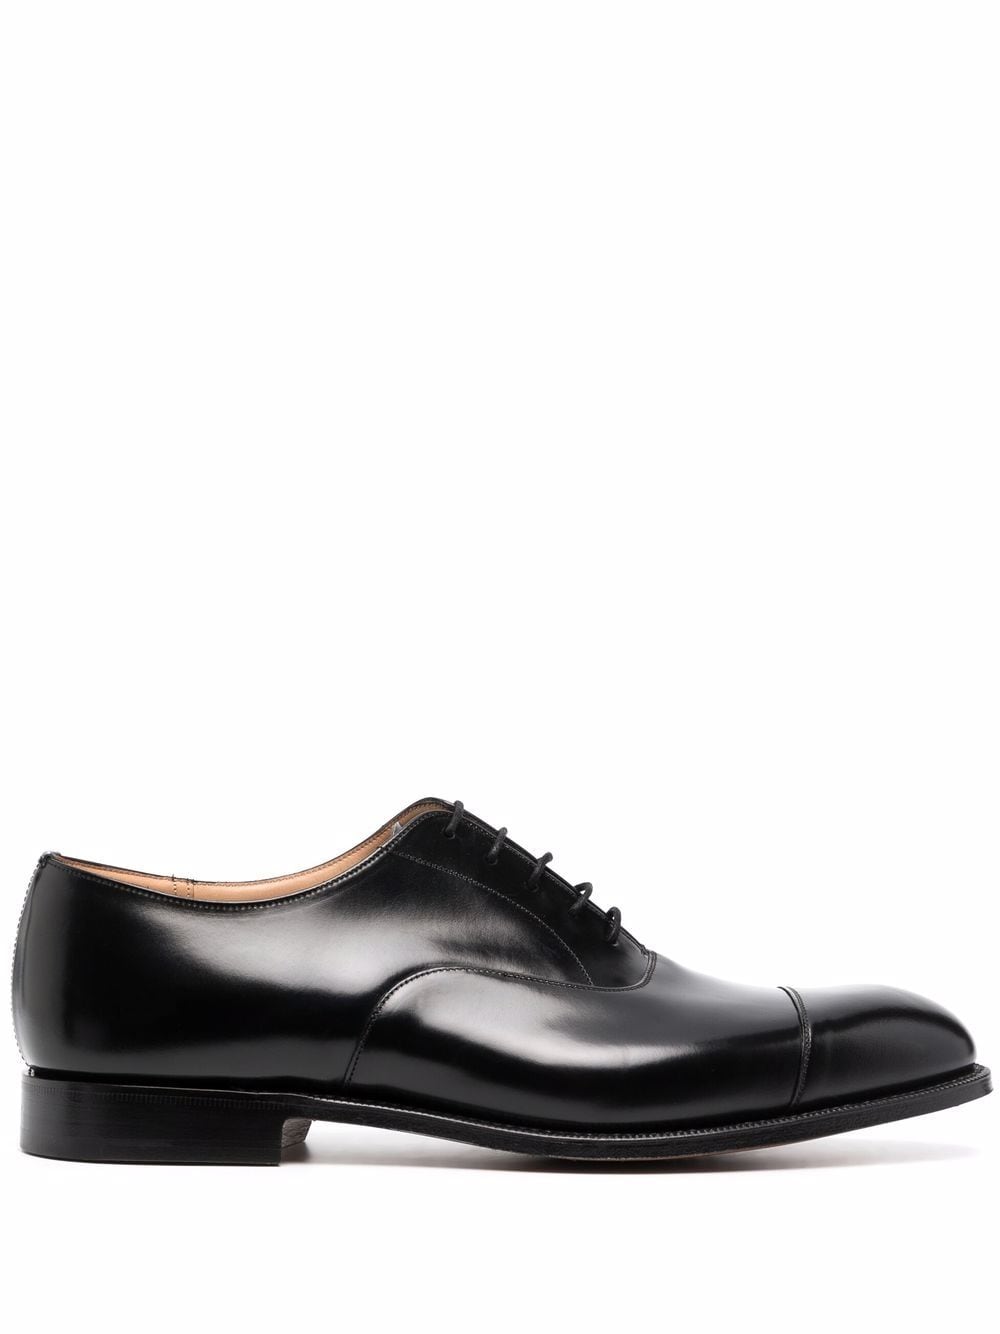 Image 1 of Church's lace-up Oxford shoes